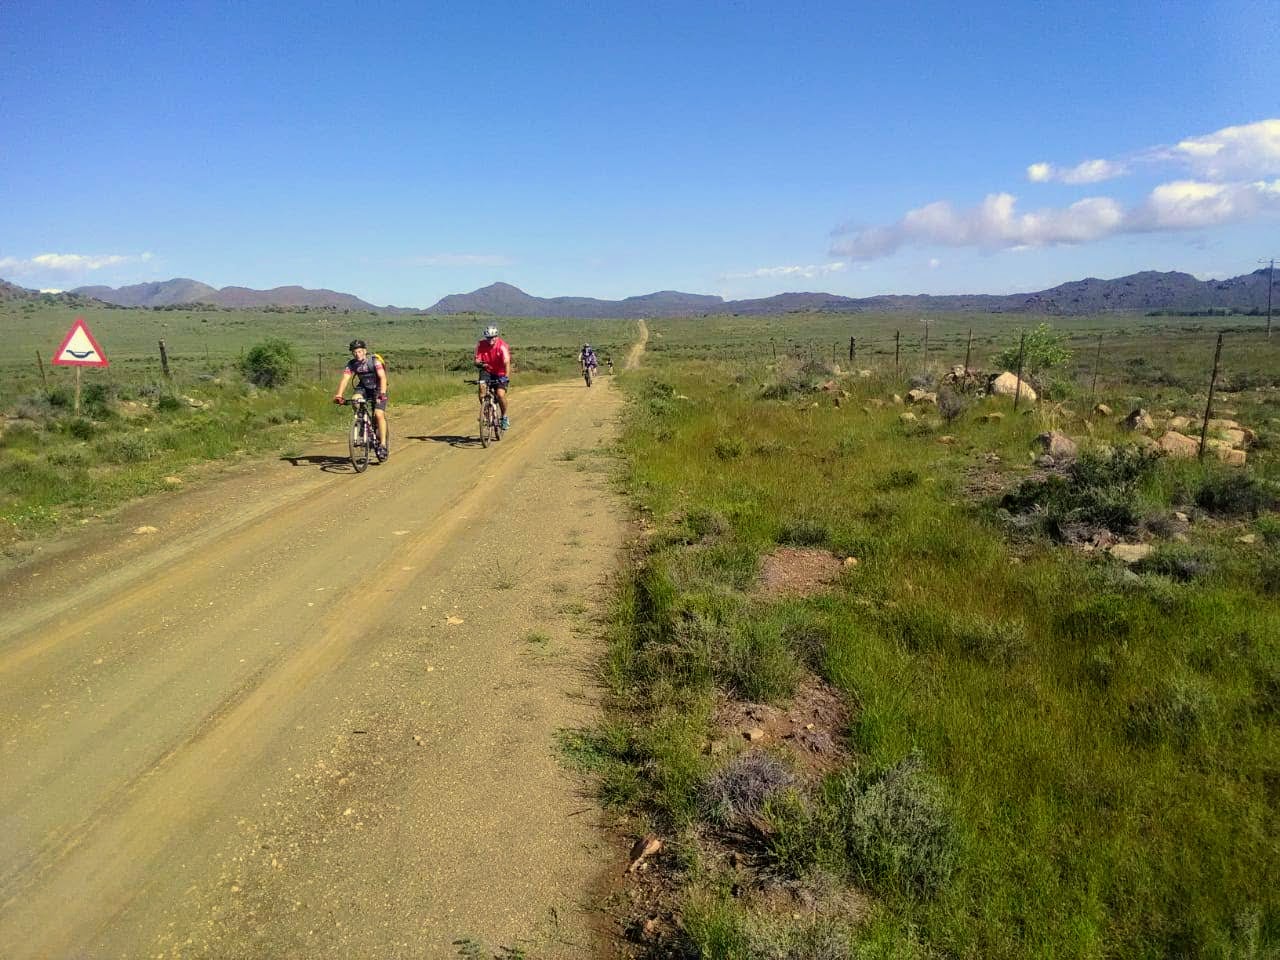 cycling along a dirt road in the karoo